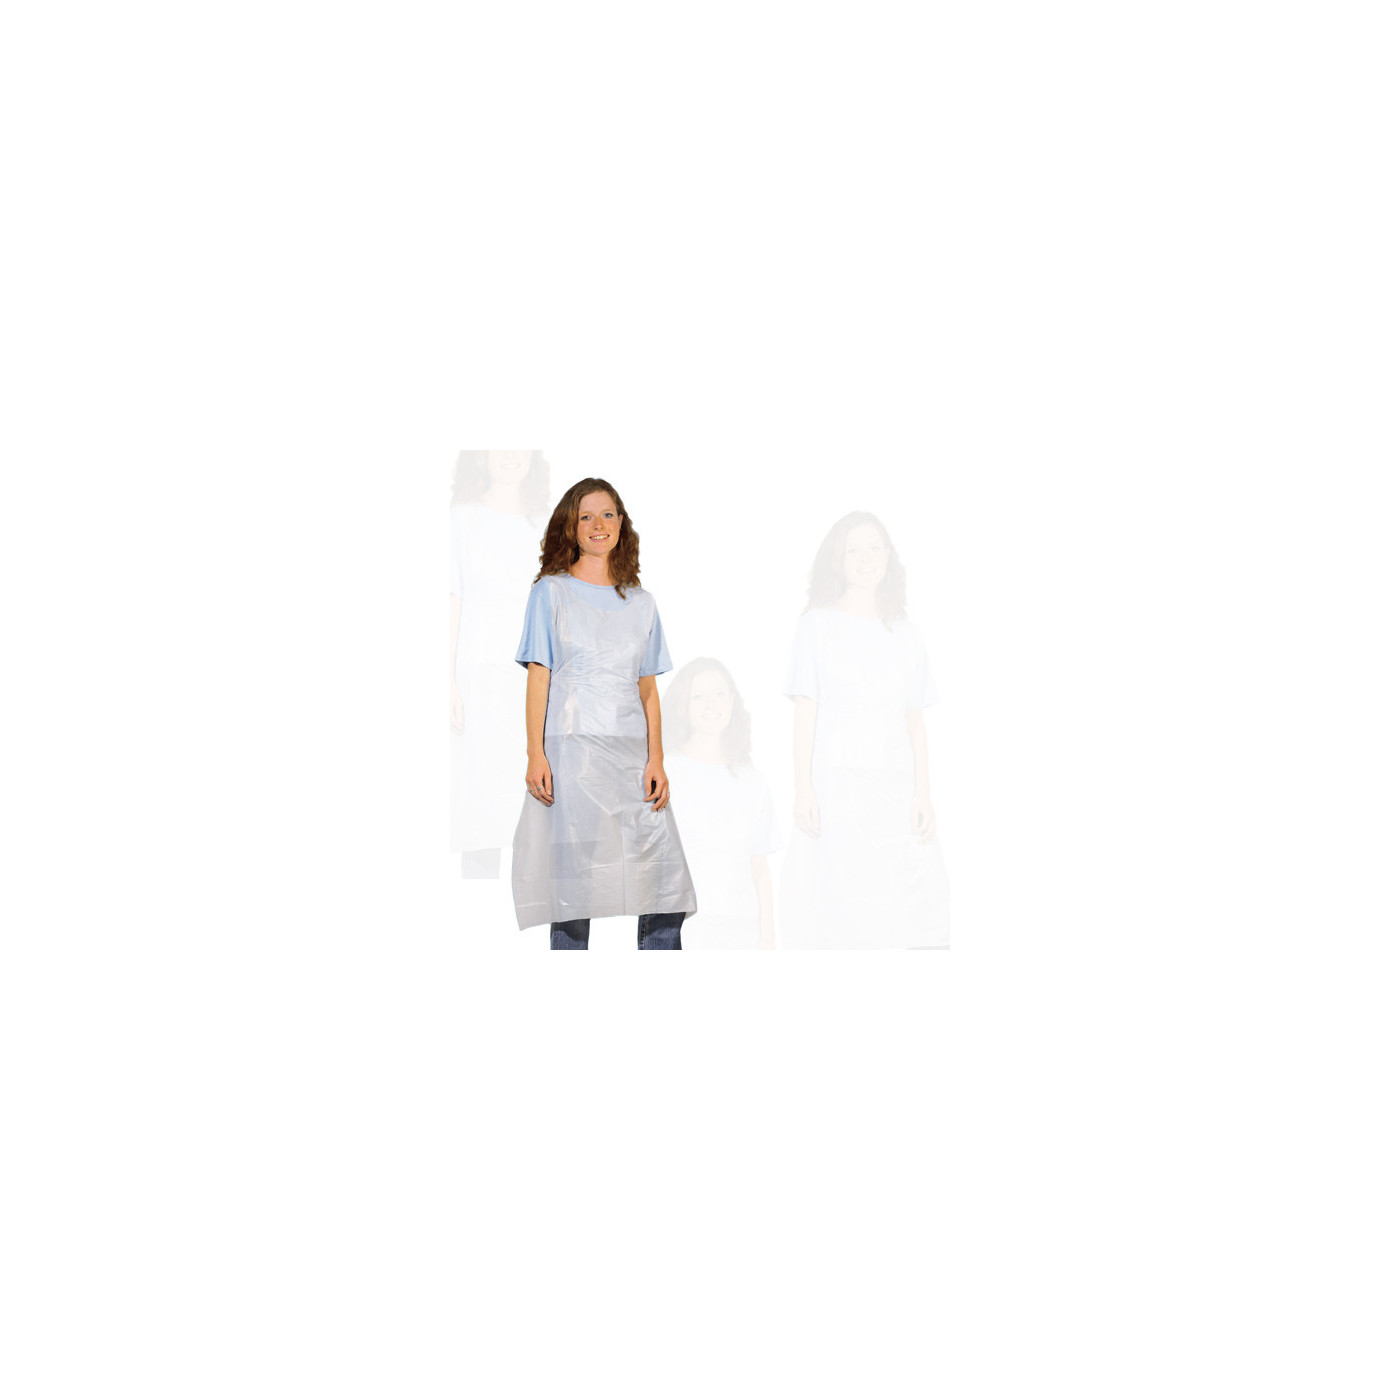 Set of 100 aprons for various activities